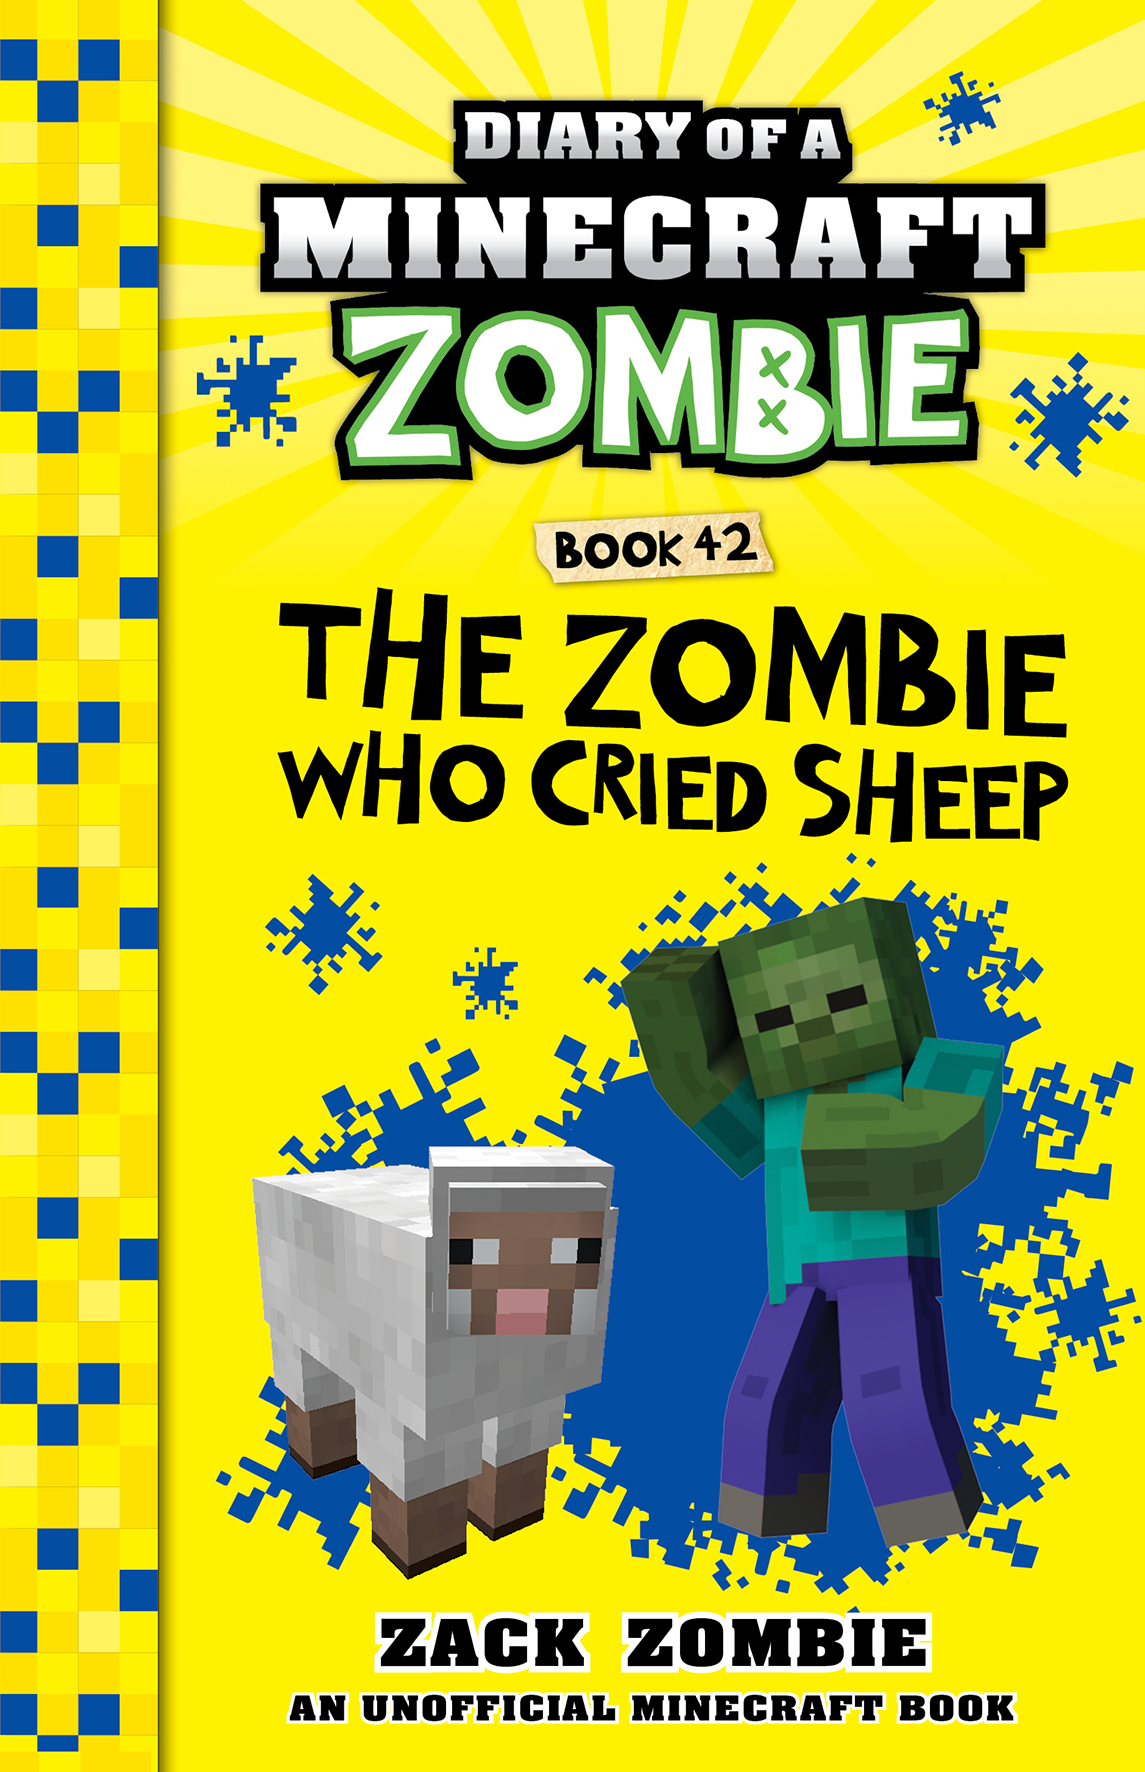 Who　42)　The　Sheep　Zombie,　Cried　of　Zombie　Minecraft　Book　(Diary　a